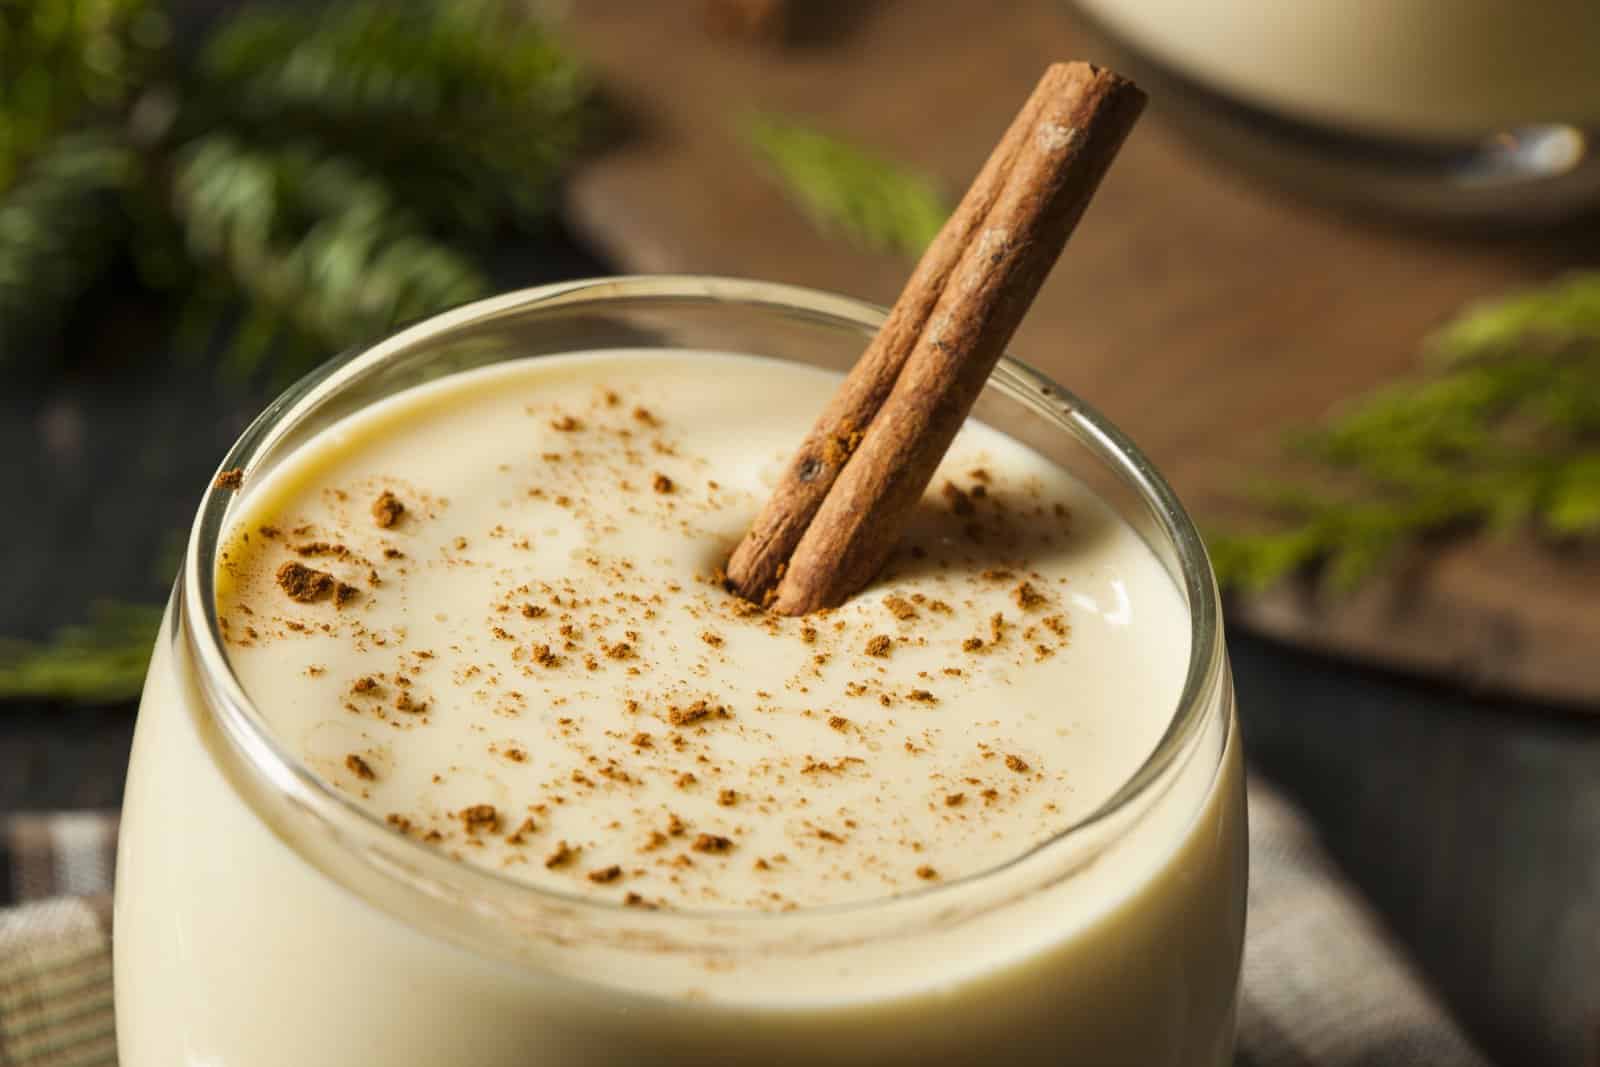 Image Credit: Shutterstock / Brent Hofacker <p><span>Treat yourself to zabaione, a luxurious dessert from Piedmont that’s as rich and velvety as a golden sunset. Made with egg yolks, sugar, and Marsala wine, this luscious custard is whipped to airy perfection and served warm or chilled, depending on your preference. Sample it in Turin, the capital of Piedmont, where it’s a beloved tradition during the city’s annual chocolate festival. Close your eyes and let the decadent flavors of zabaione transport you to a realm of pure indulgence.</span></p>